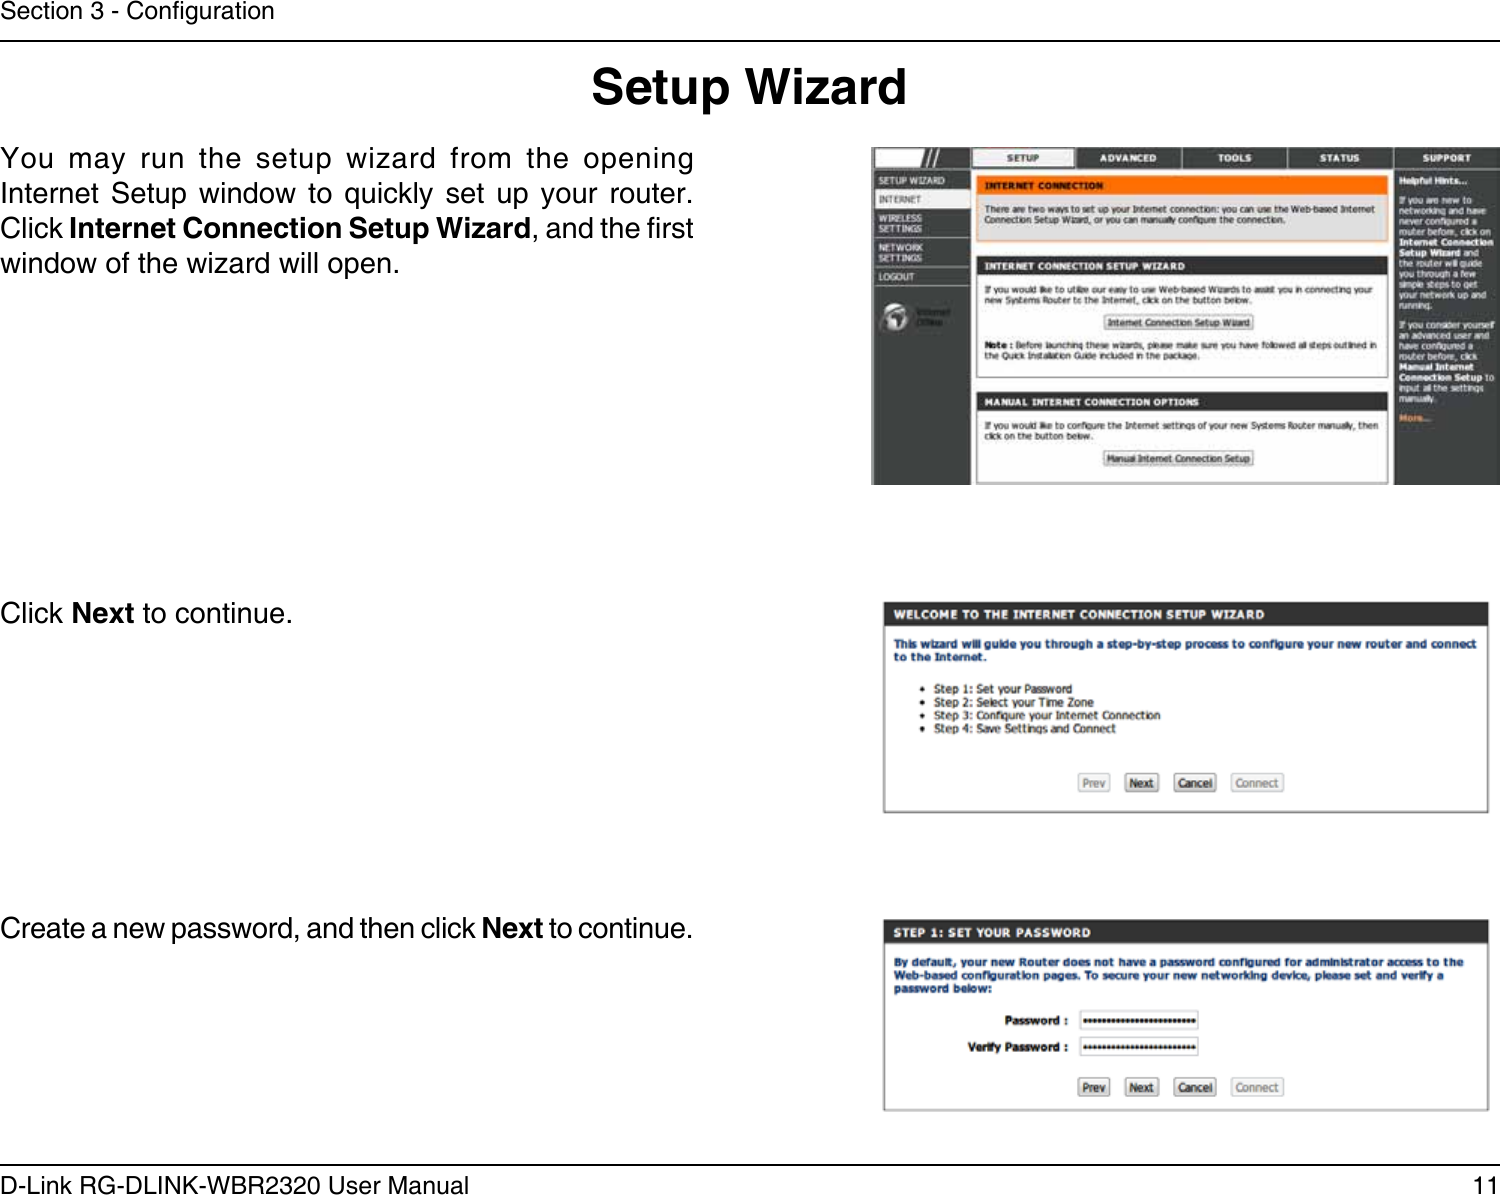 11D-Link RG-DLINK-WBR2320 User ManualSection 3 - CongurationSetup WizardYou  may  run  the  setup  wizard  from  the  opening Internet  Setup  window  to  quickly  set  up  your  router. Click Internet Connection Setup Wizard, and the rst window of the wizard will open.Click Next to continue.Create a new password, and then click Next to continue.